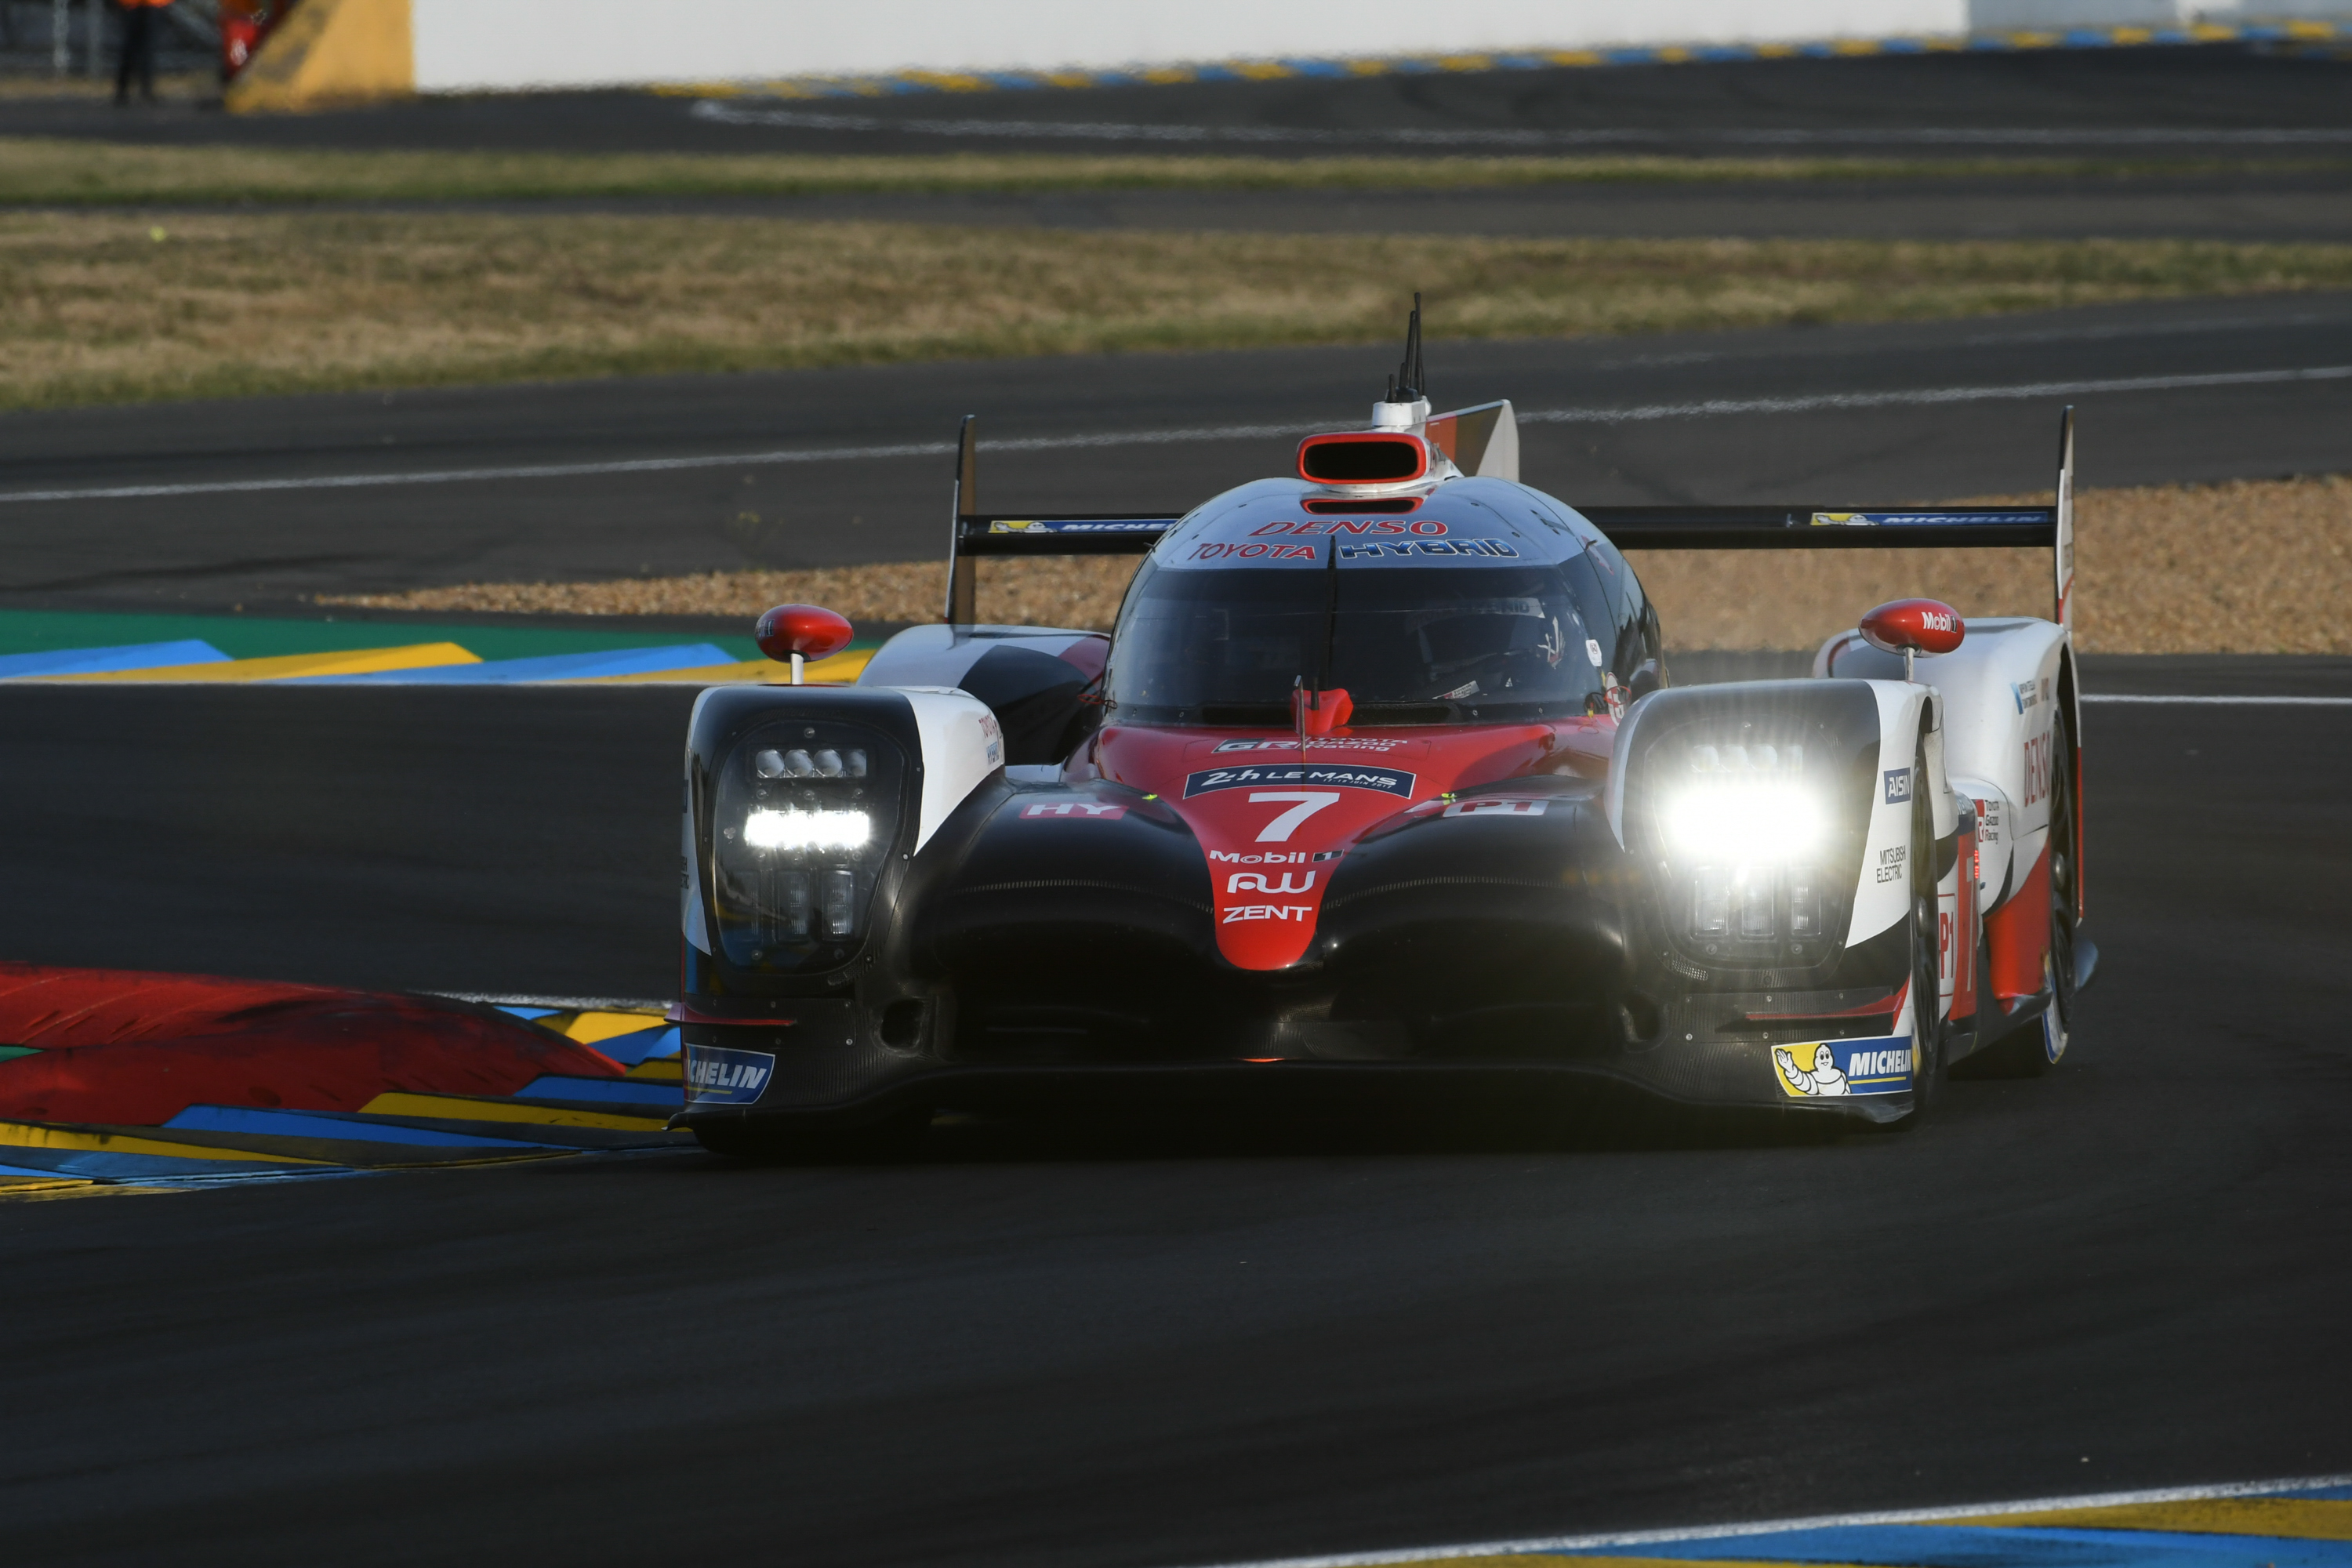 The TS050 Hybrid delivered more than 1,000 hp during qualifying.